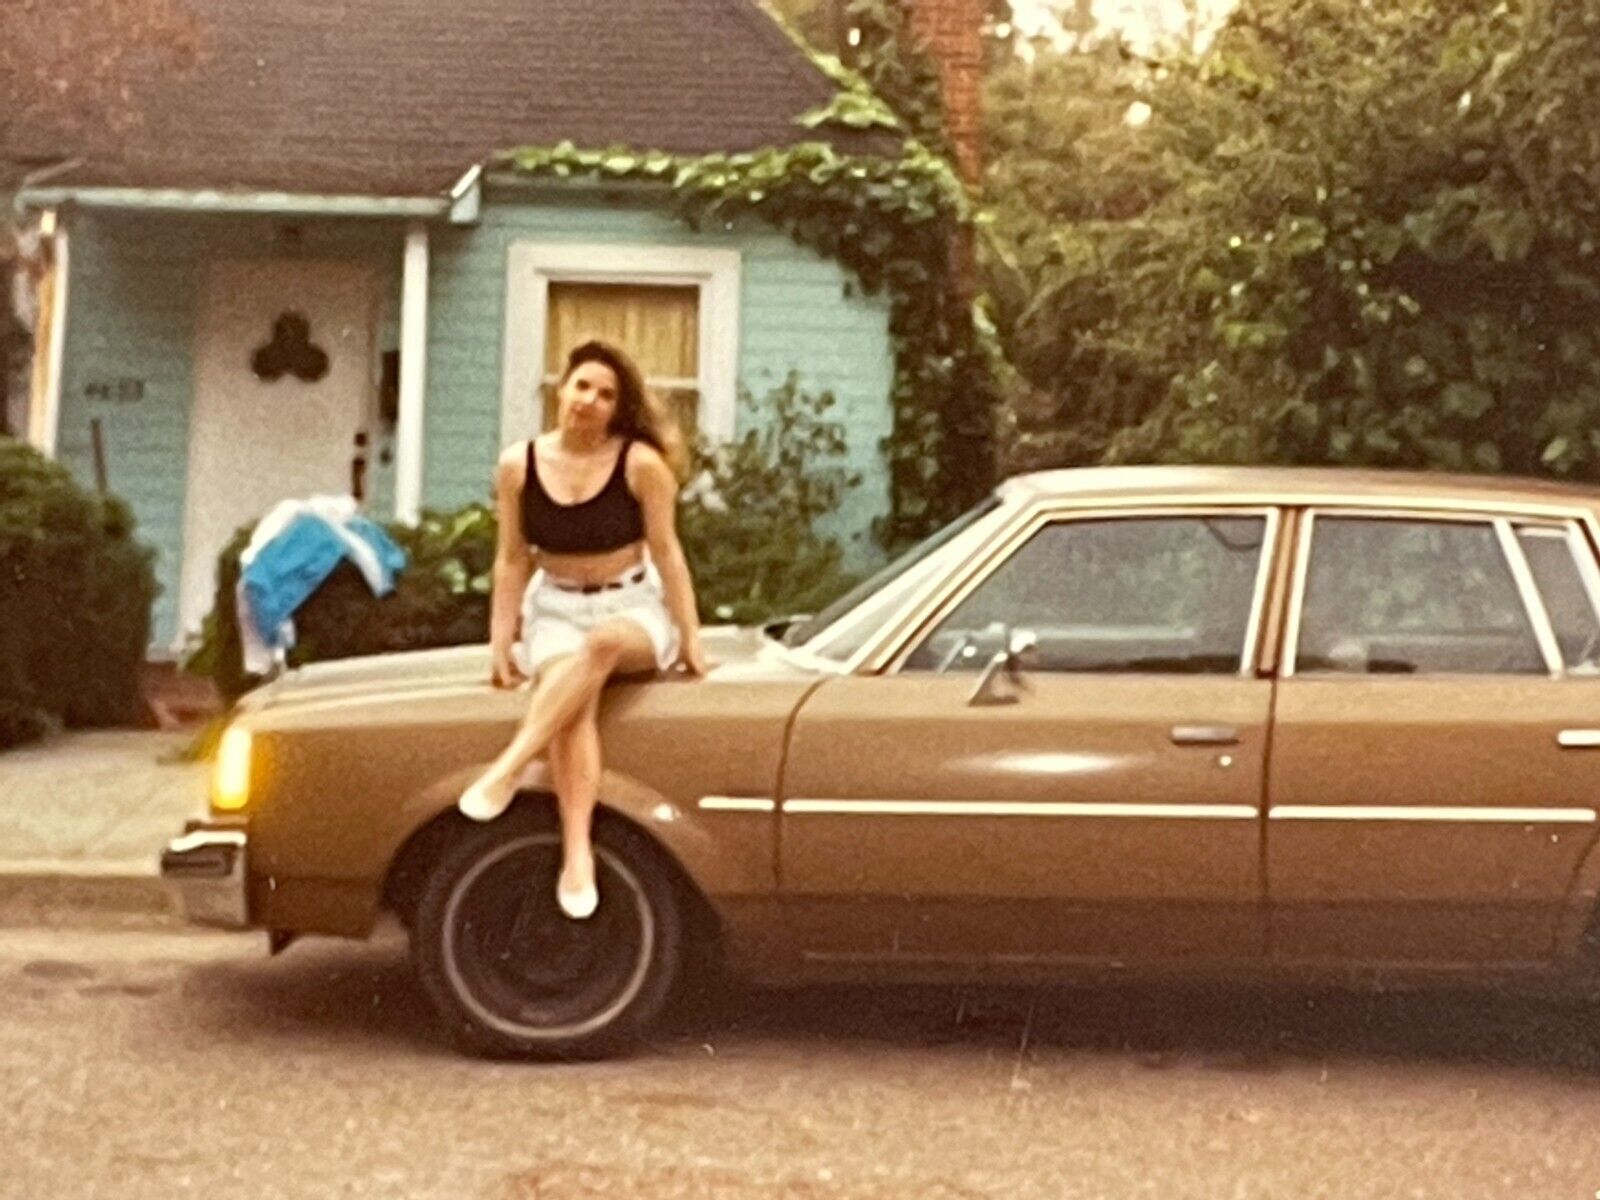 Z1 Photograph Woman Poses On Old Car 1980's